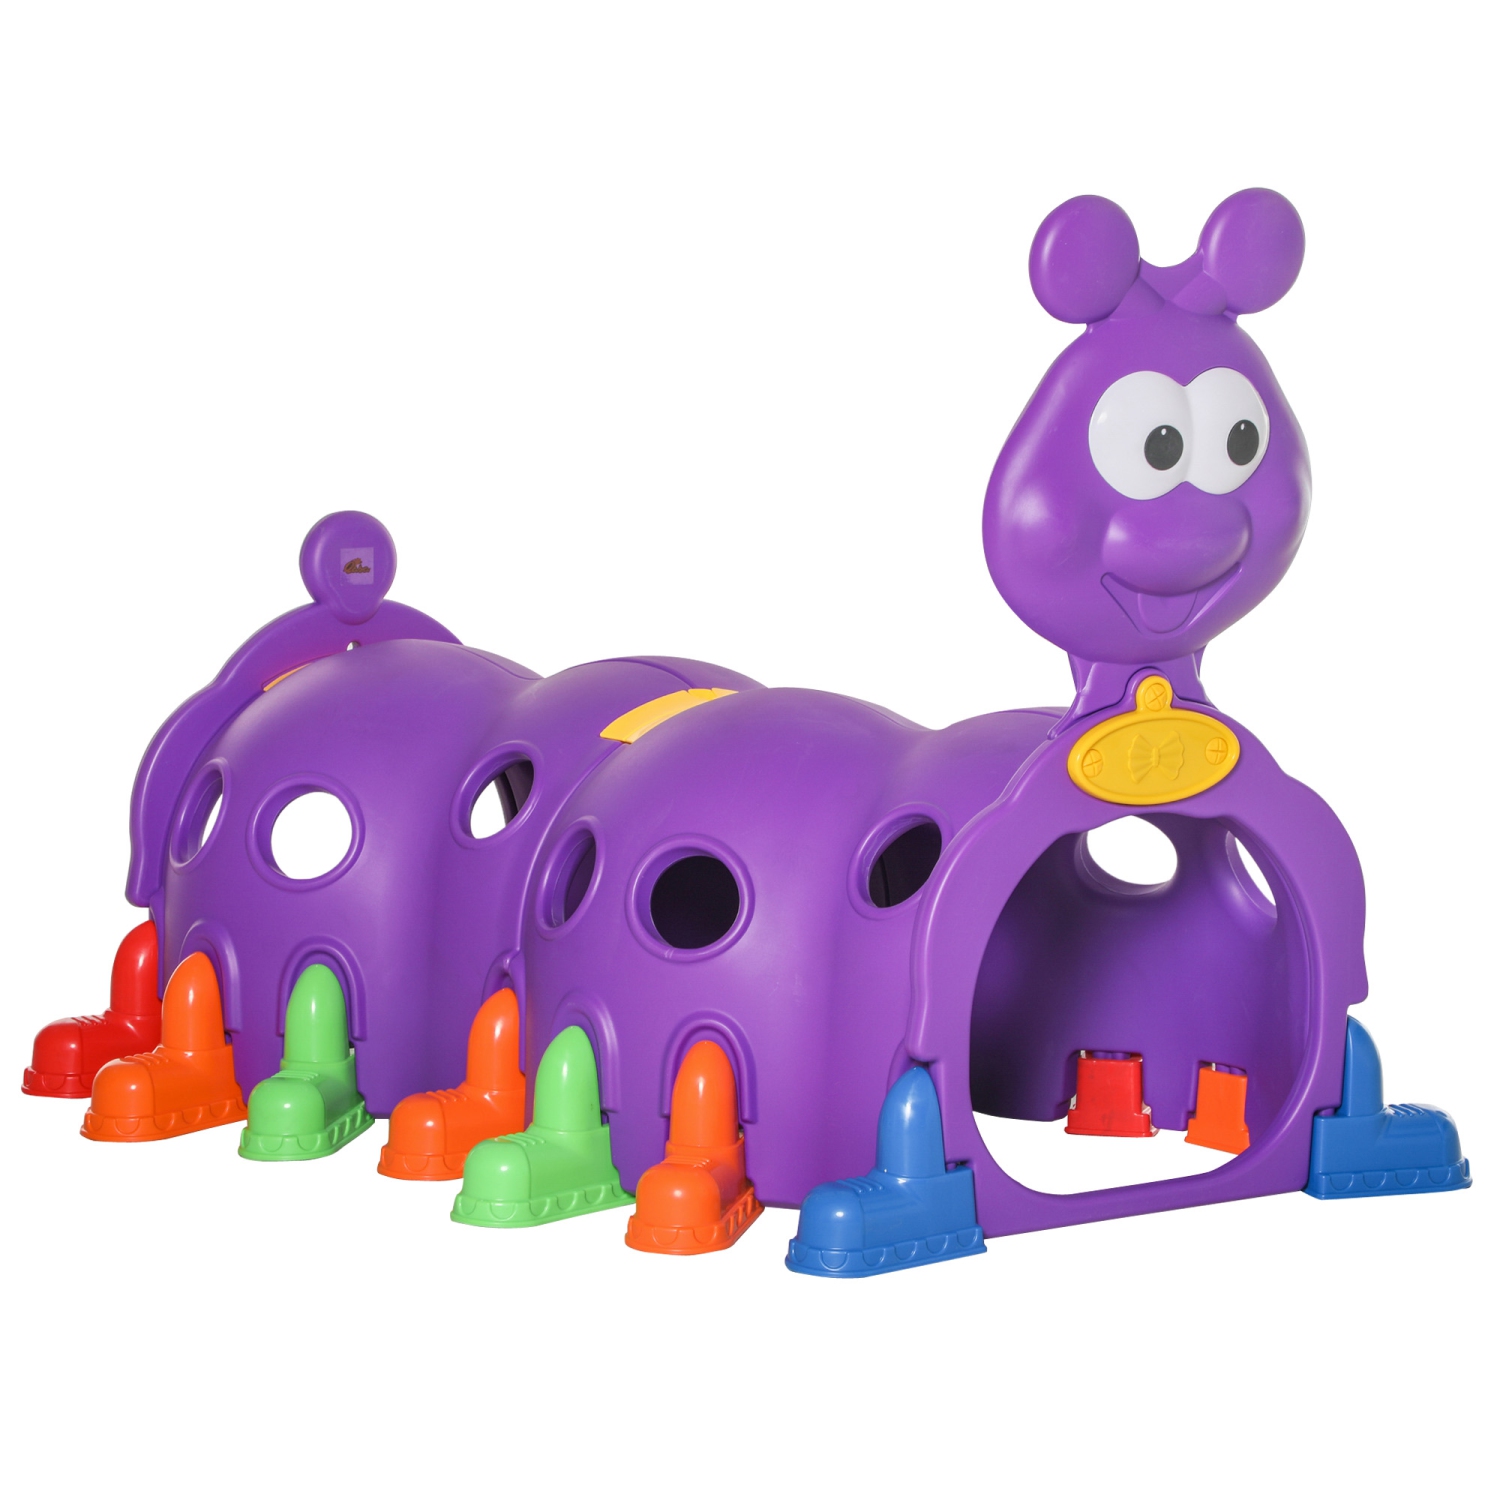 Qaba Caterpillar Tunnels for Kids to Crawl Through Climbing Toy Indoor & Outdoor Play Structure for 3-6 Years Old, Purple